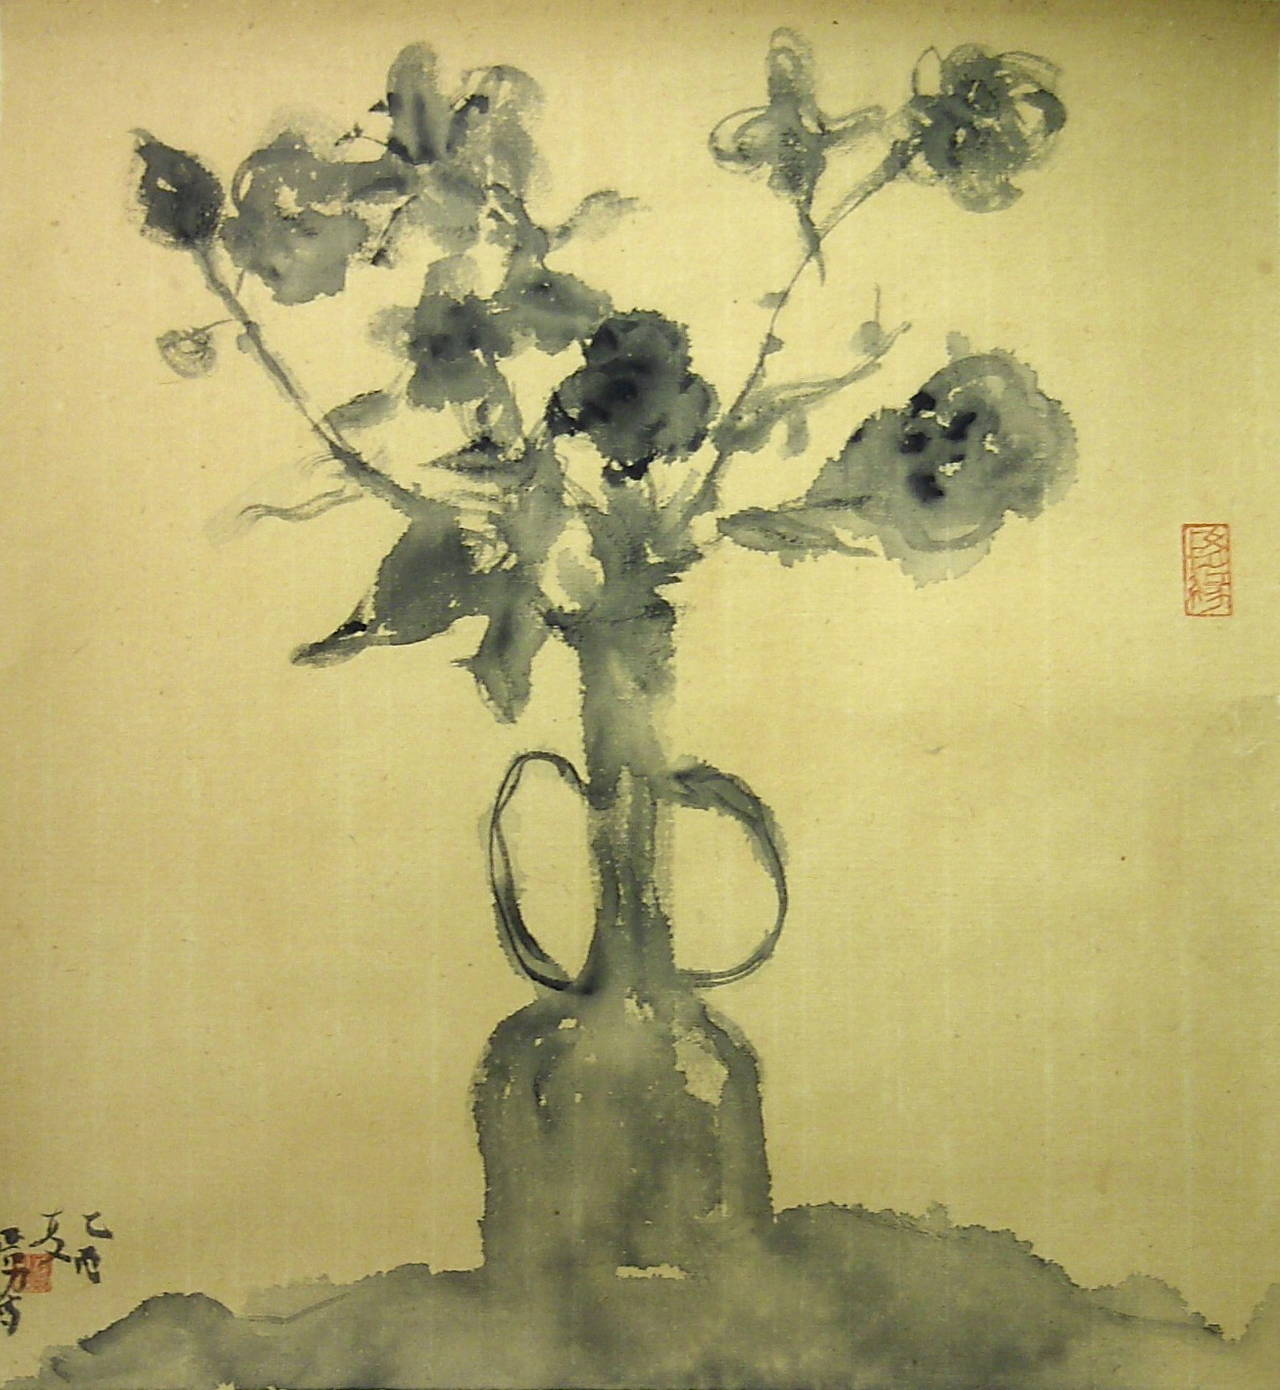 Luo Yanan Still-Life - "Untitled #4" Chinese still life of a vase of flowers in black ink on paper 